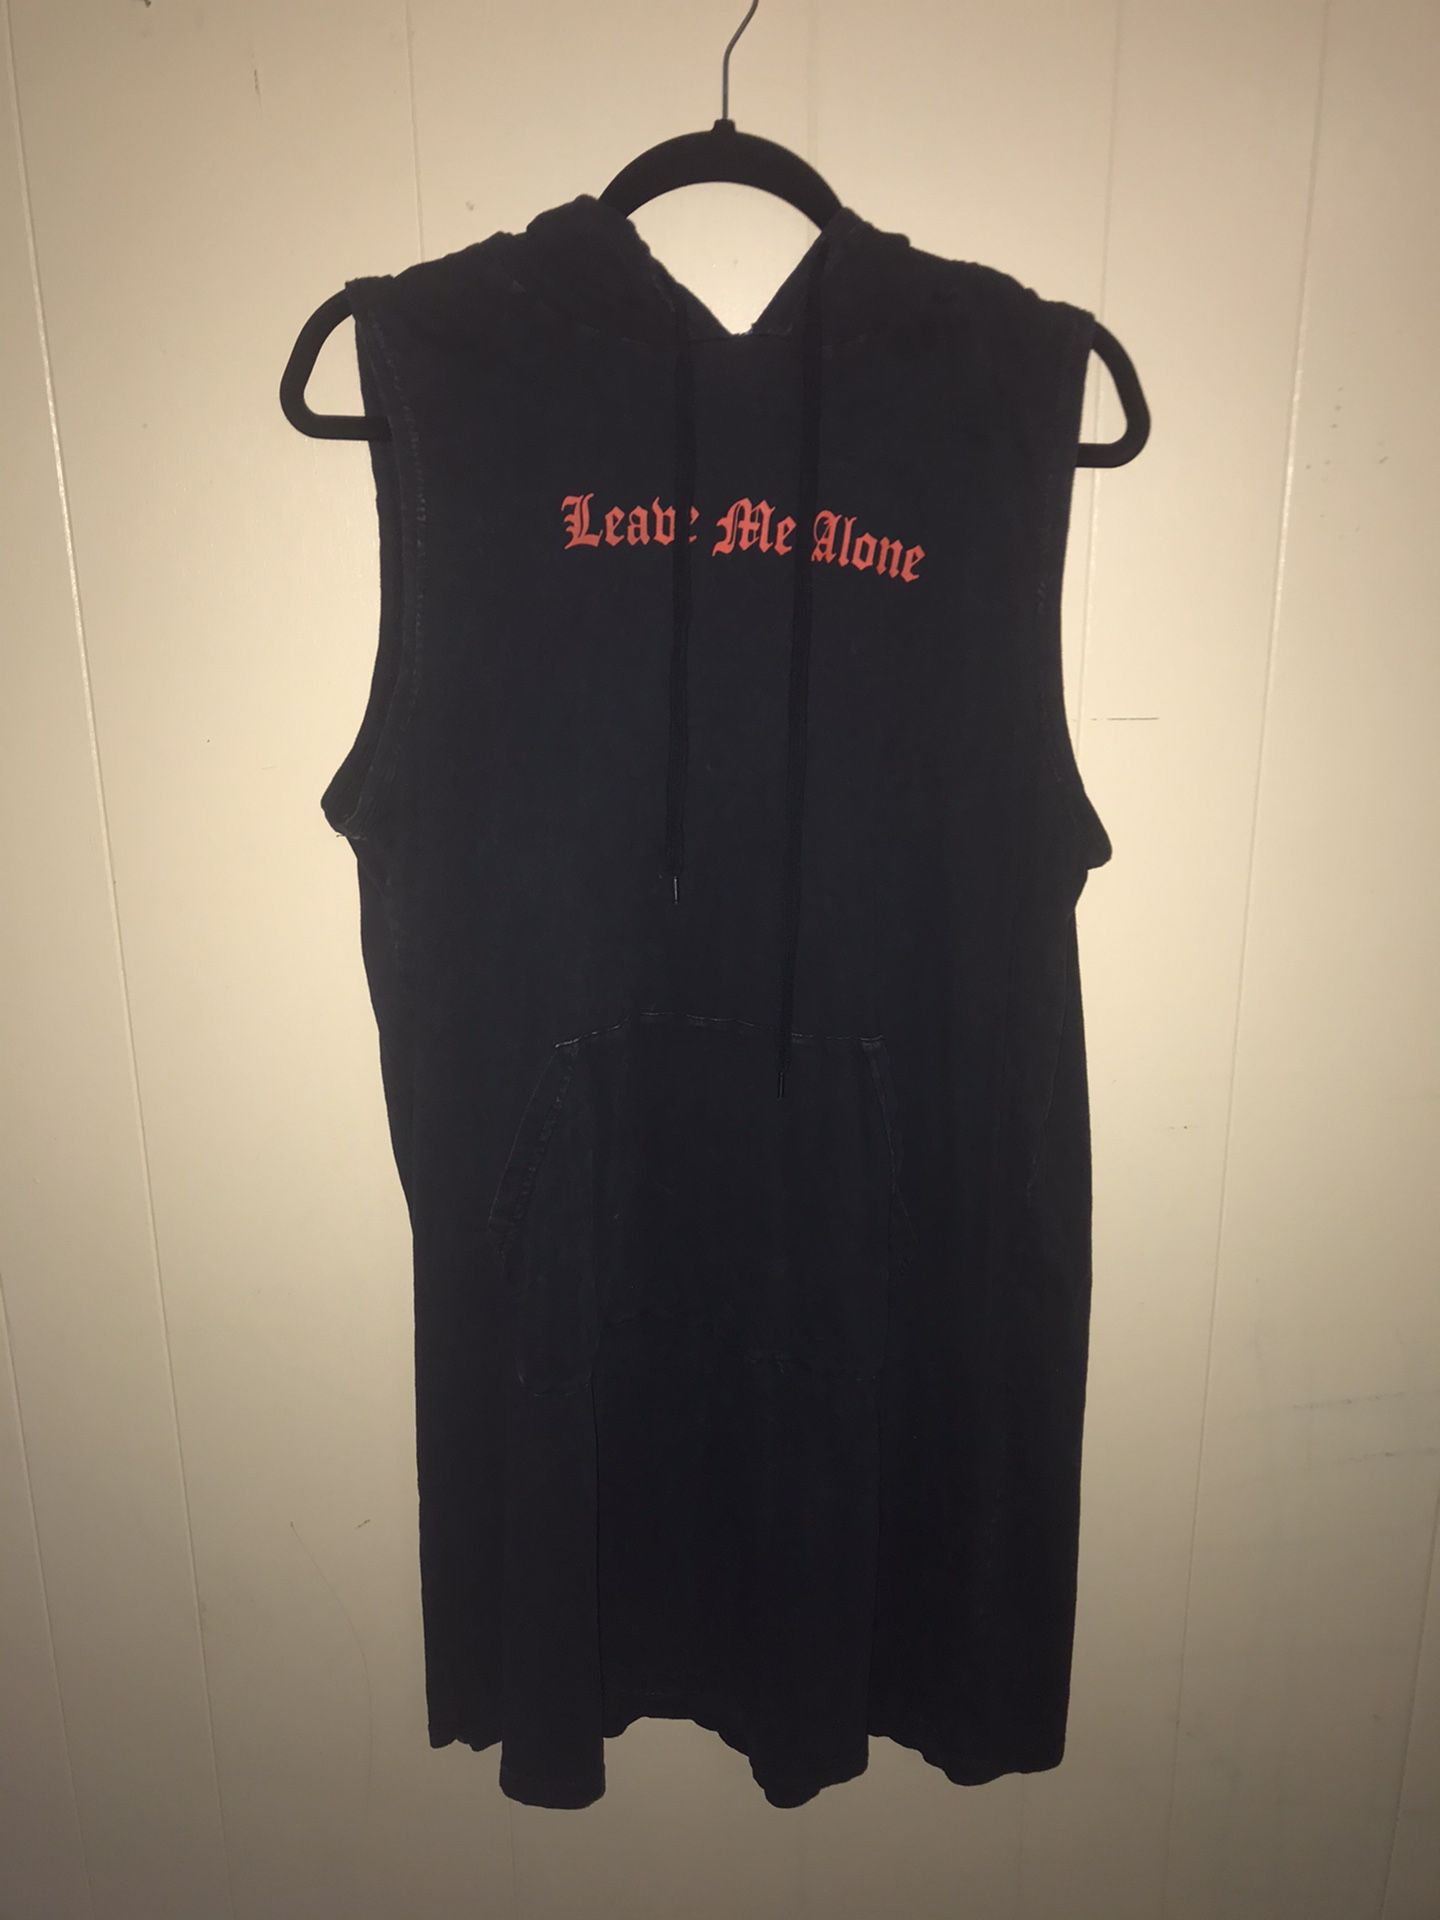 Hot Topic Leave Me Alone Casual Hoodie Dress